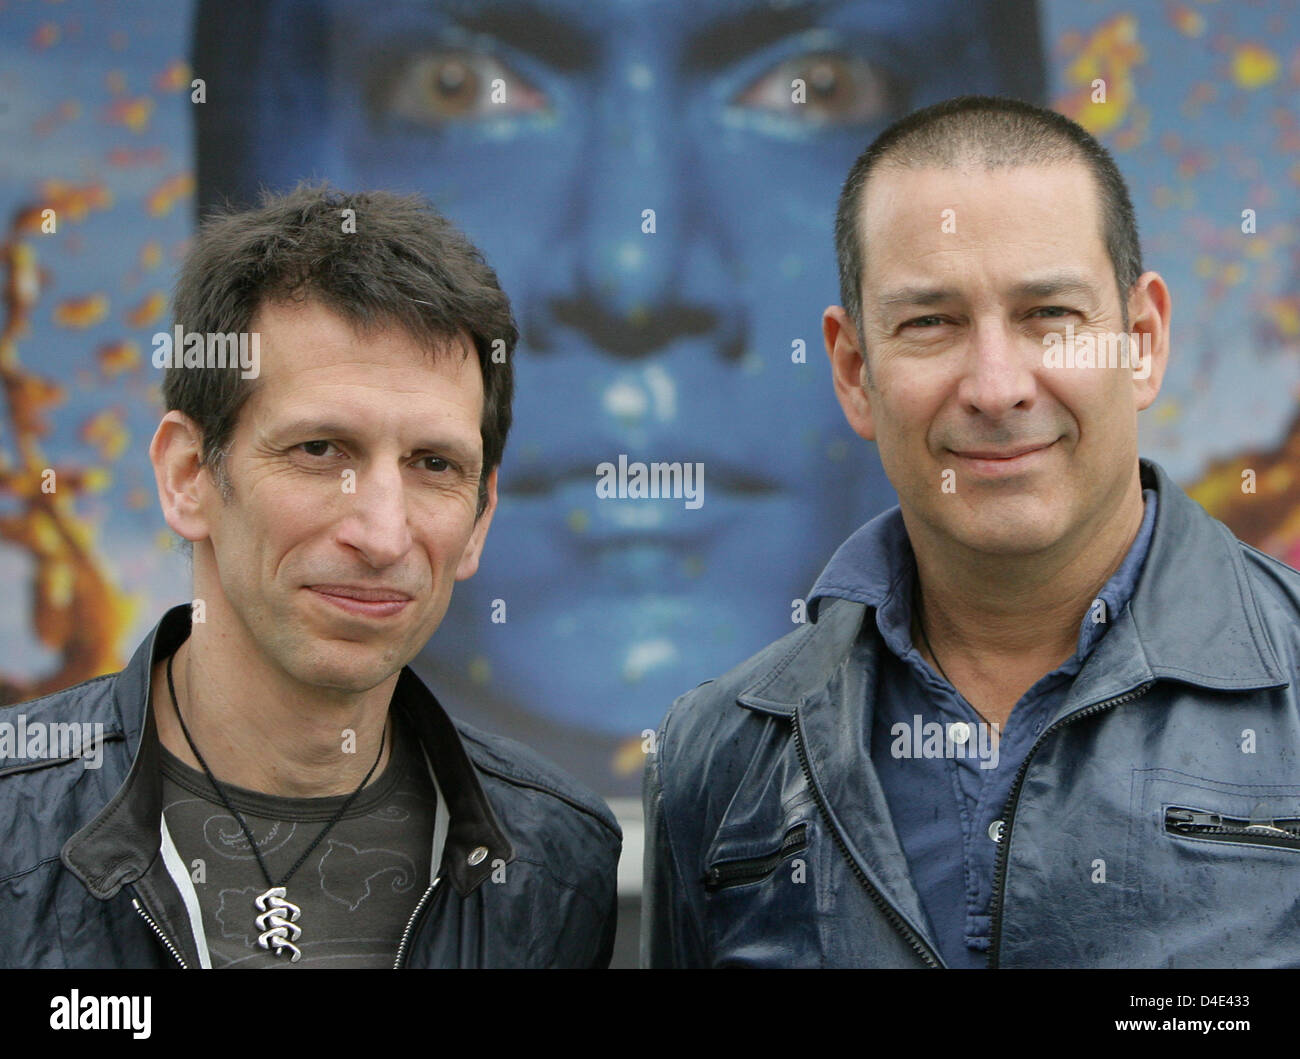 Matt Goldman (L) and Phil Stanton (R) of Blue Man Group pose for photos in  Berlin, Germany, 16 May 2008. After four years on stage with 1.5 million  spectators, the Blue Man